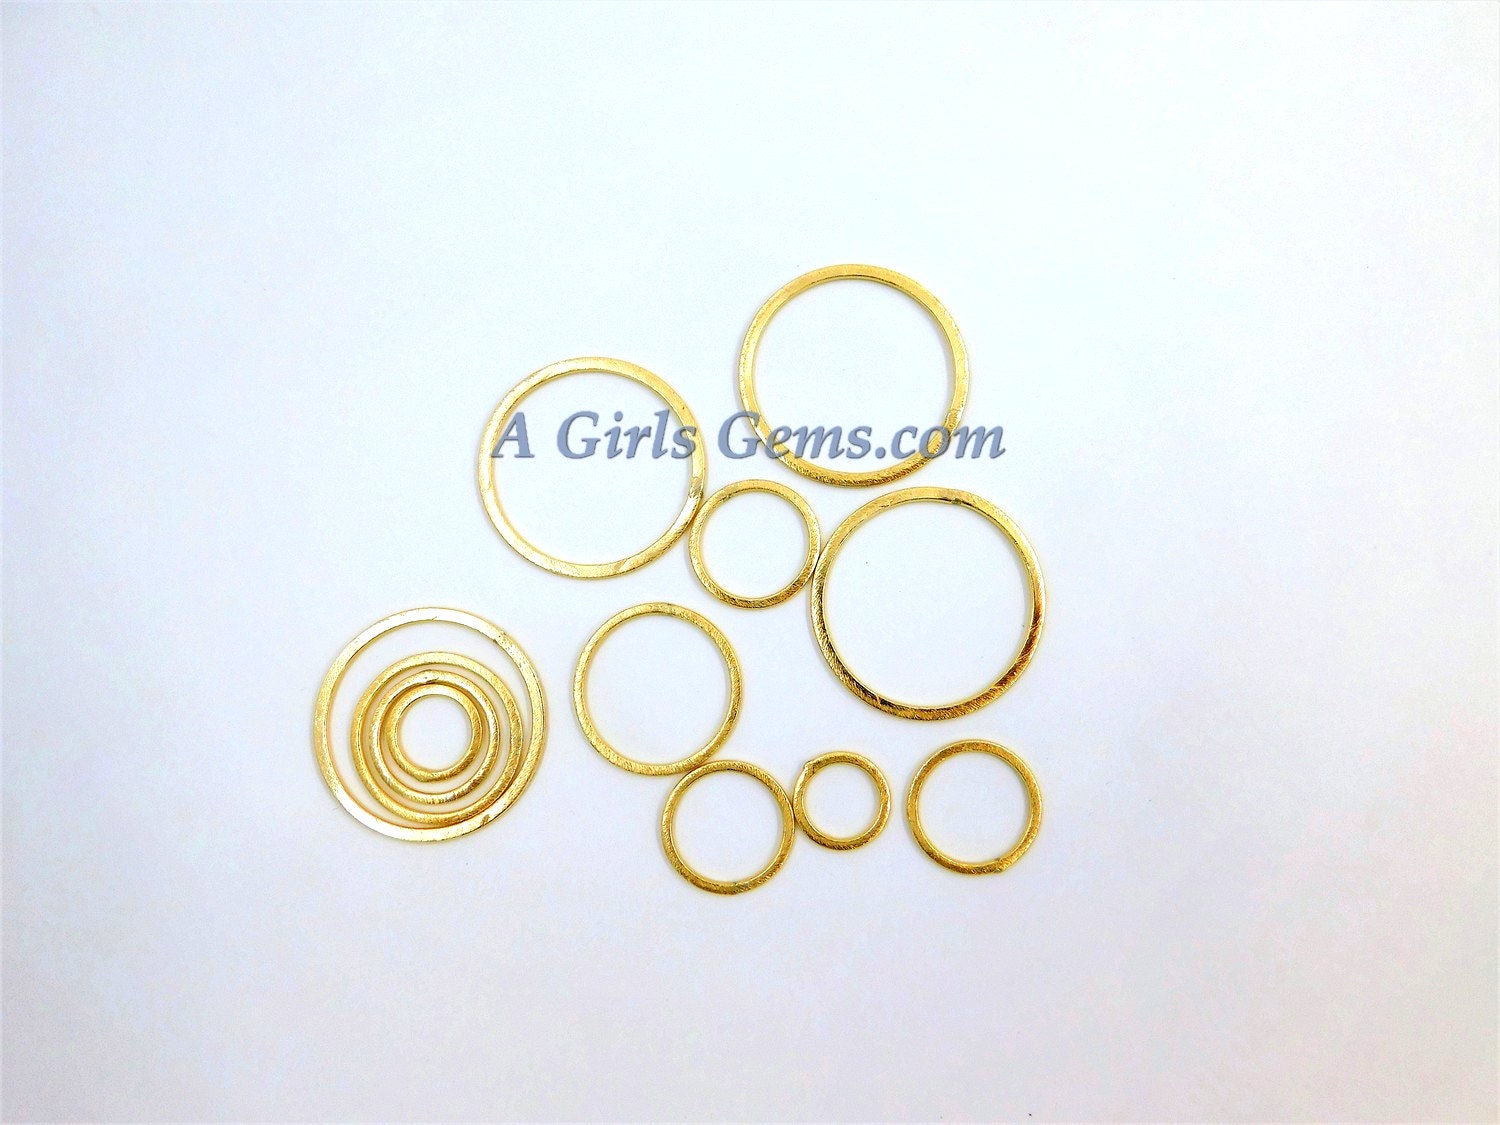 Brushed Gold Washer Charms, Gold Round O Connector Ring Hoop Charms #790, Sizes 15 - 60 mm